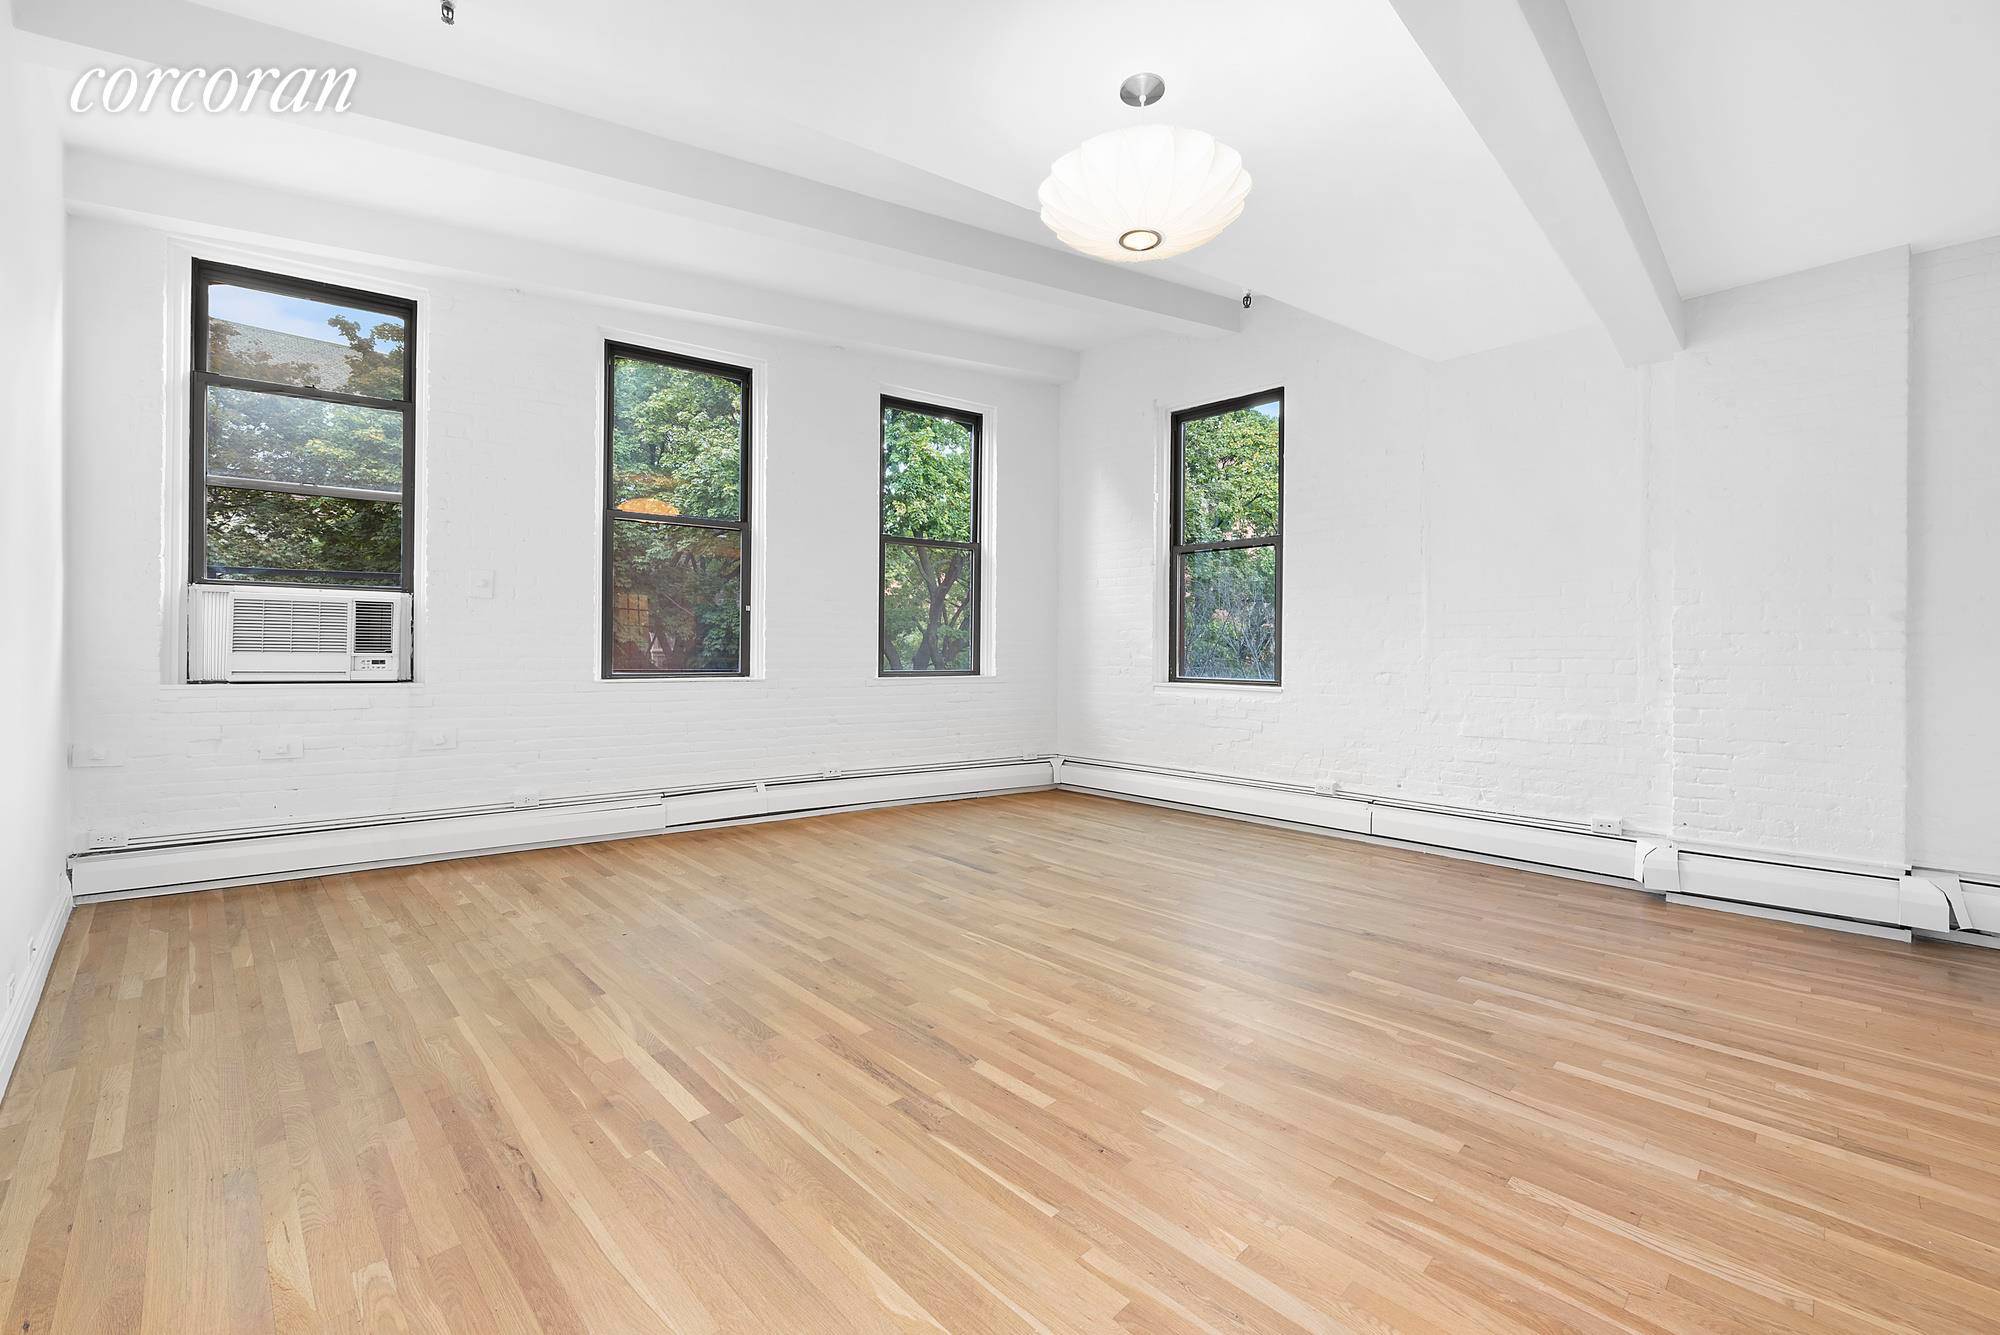 Enjoy loft living on an idyllic Nolita block in this large home with 2 bedrooms, 2 bathrooms and media room, multiple closets throughout, beamed ceilings and hardwood floors.